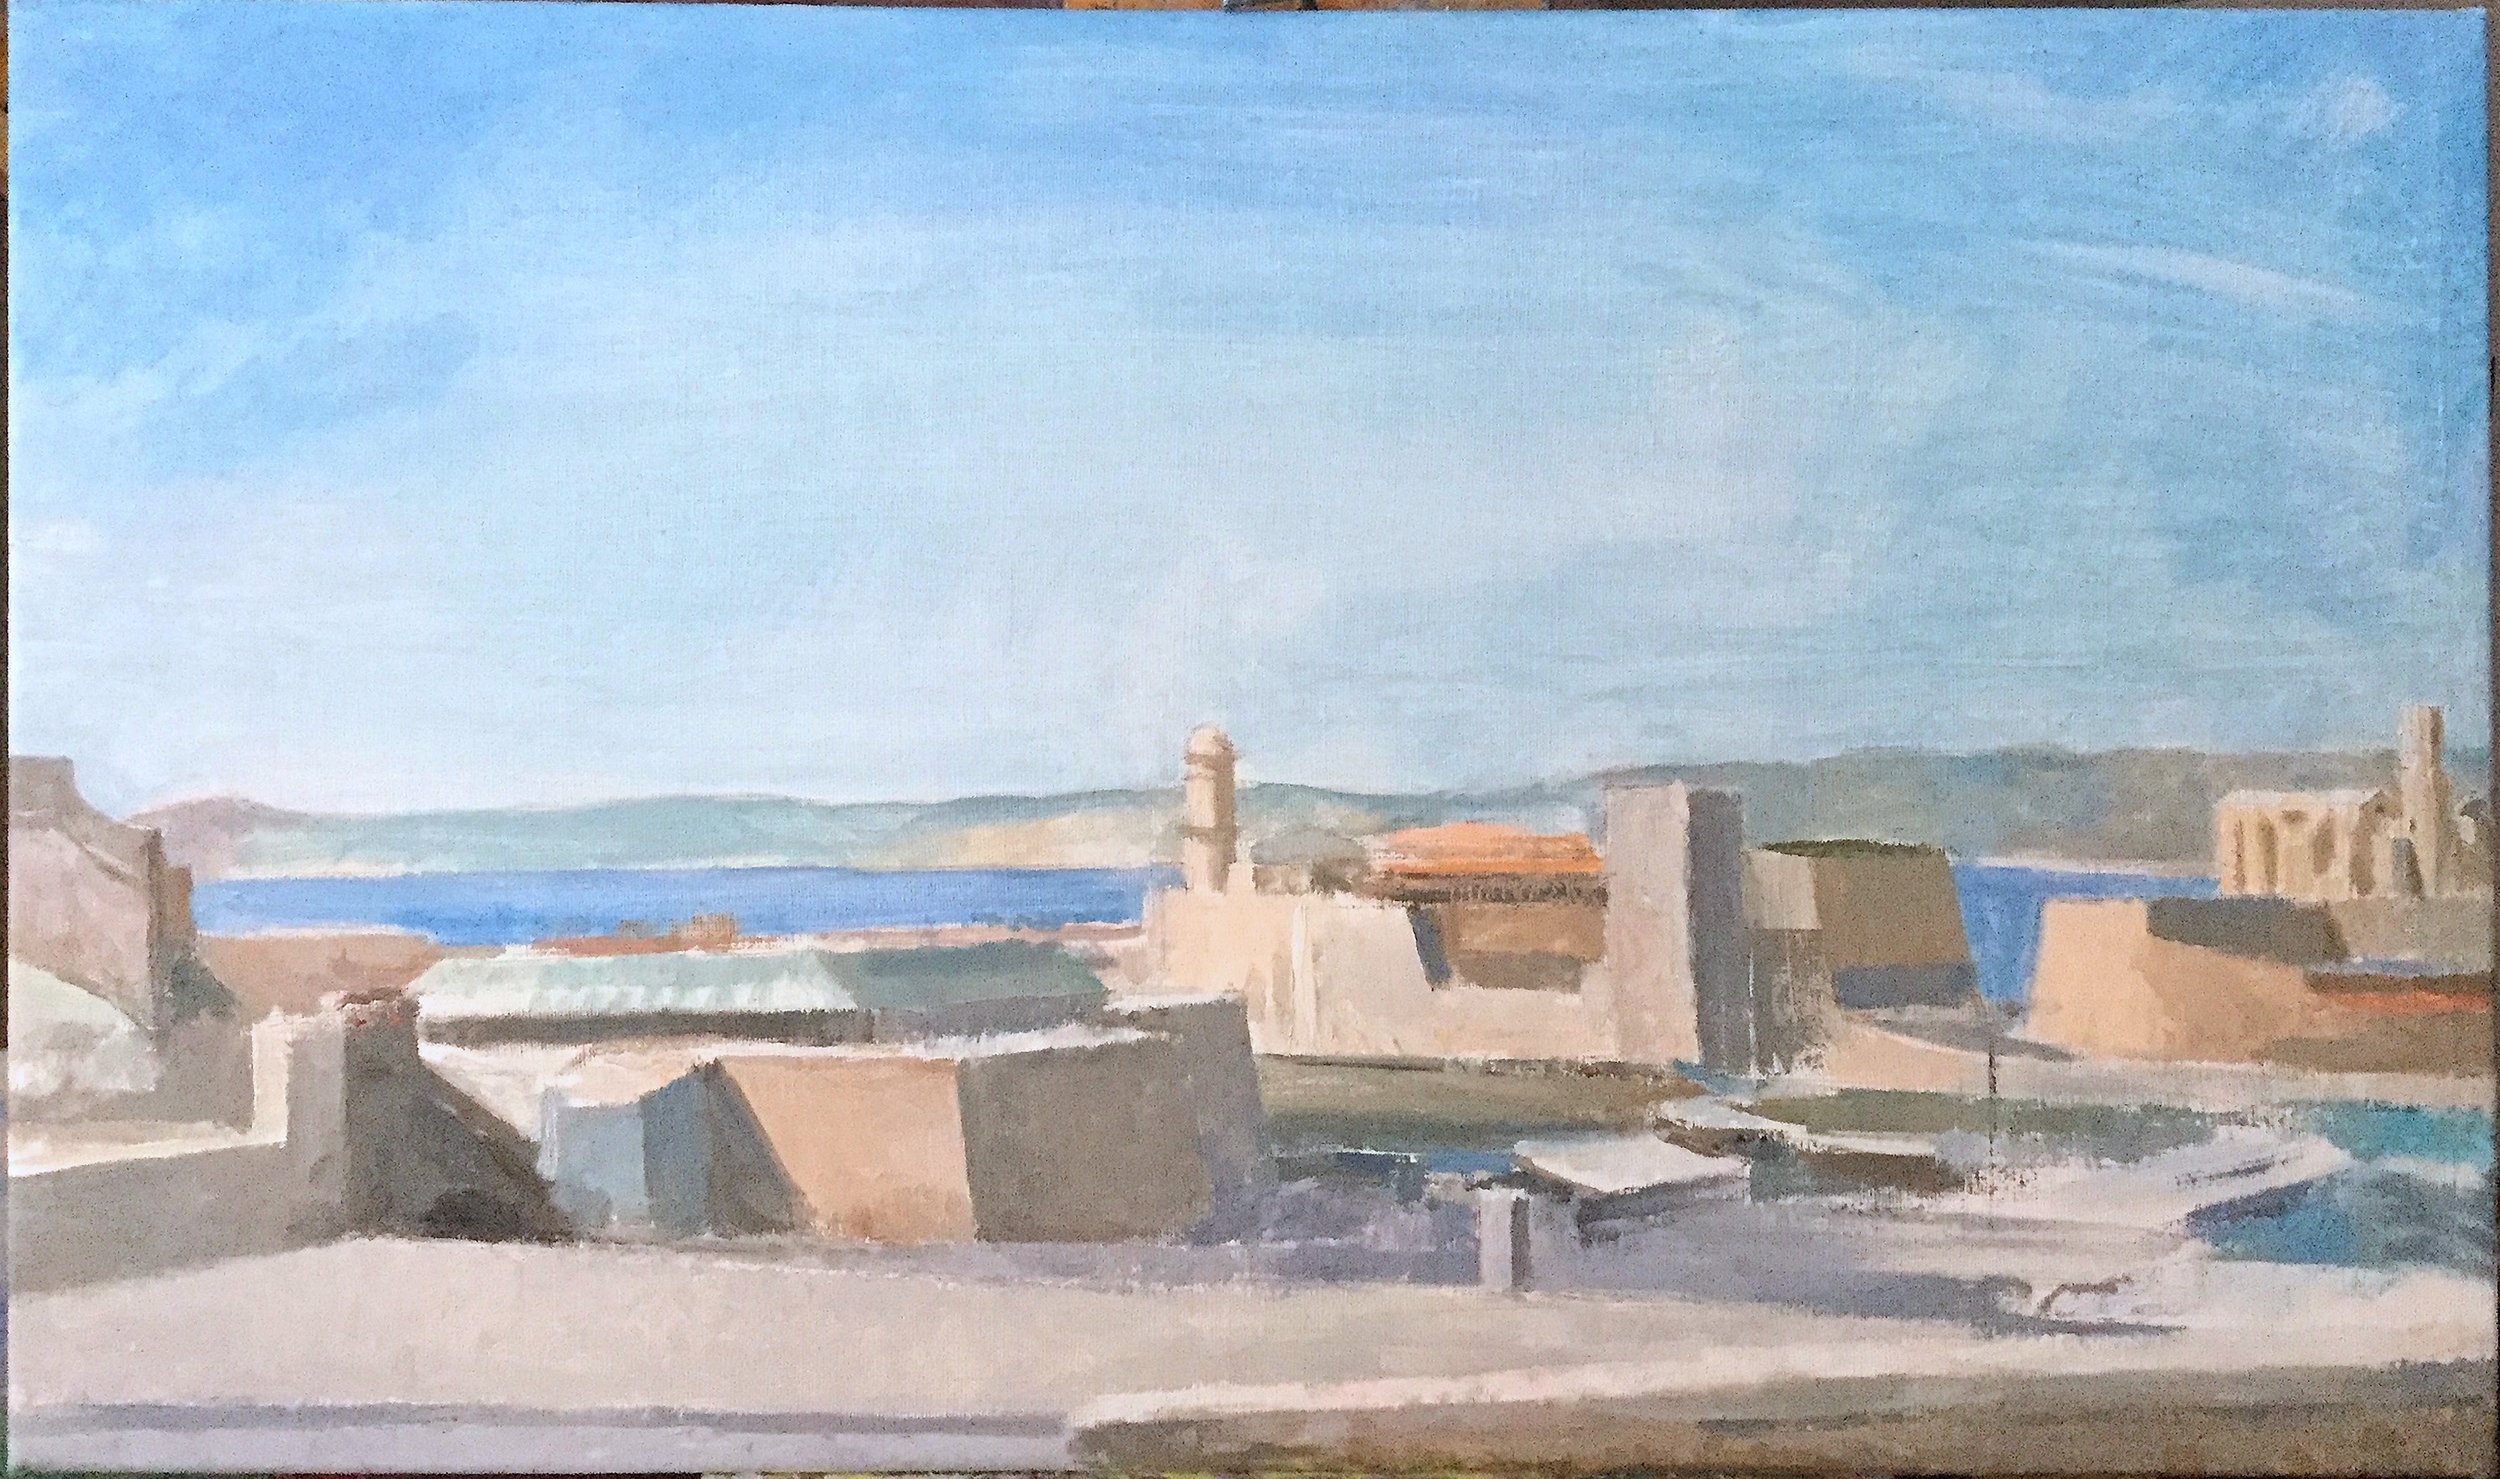 Marseille, Vieux Port and Harbor, 17 x 29 inches, oil on linen, 2019.